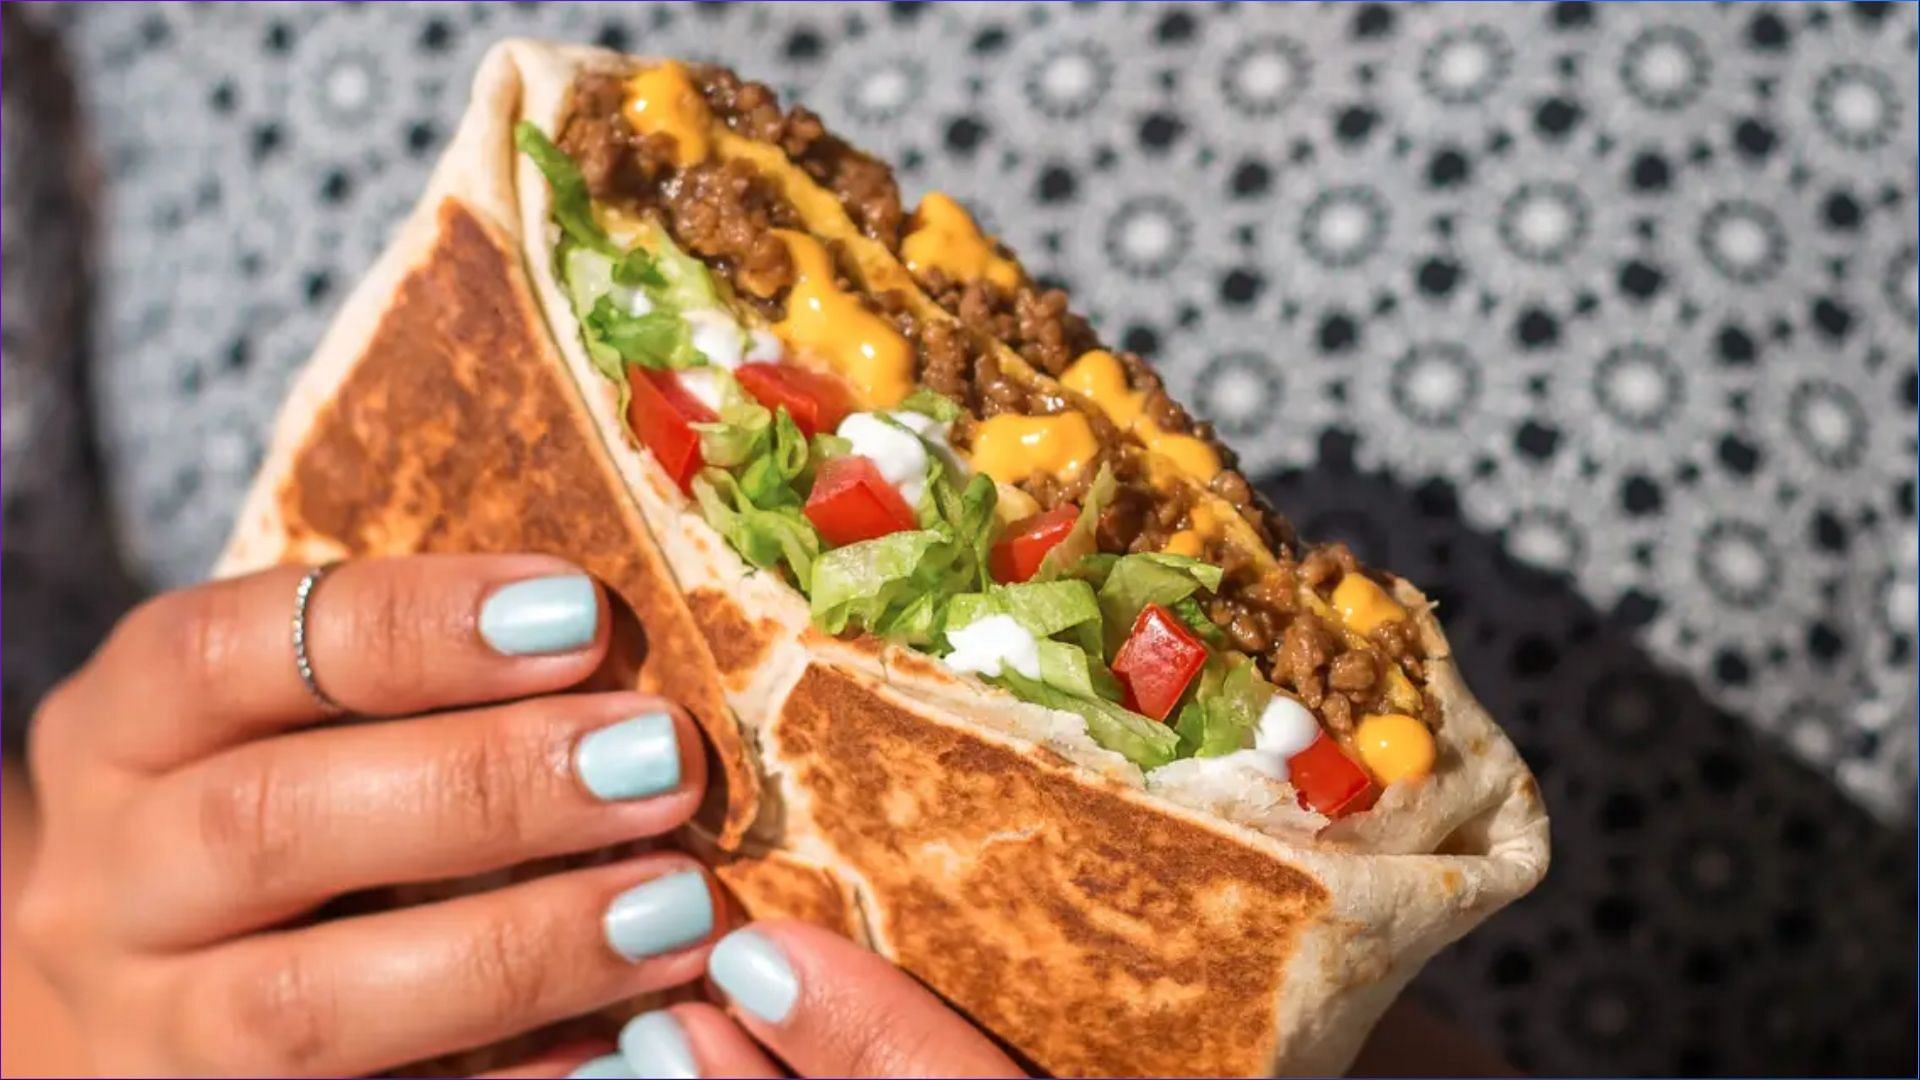 The Triple Double Crunchwrap can now be enjoyed as part of new 3-course and 5-course meals (Image via Taco Bell)